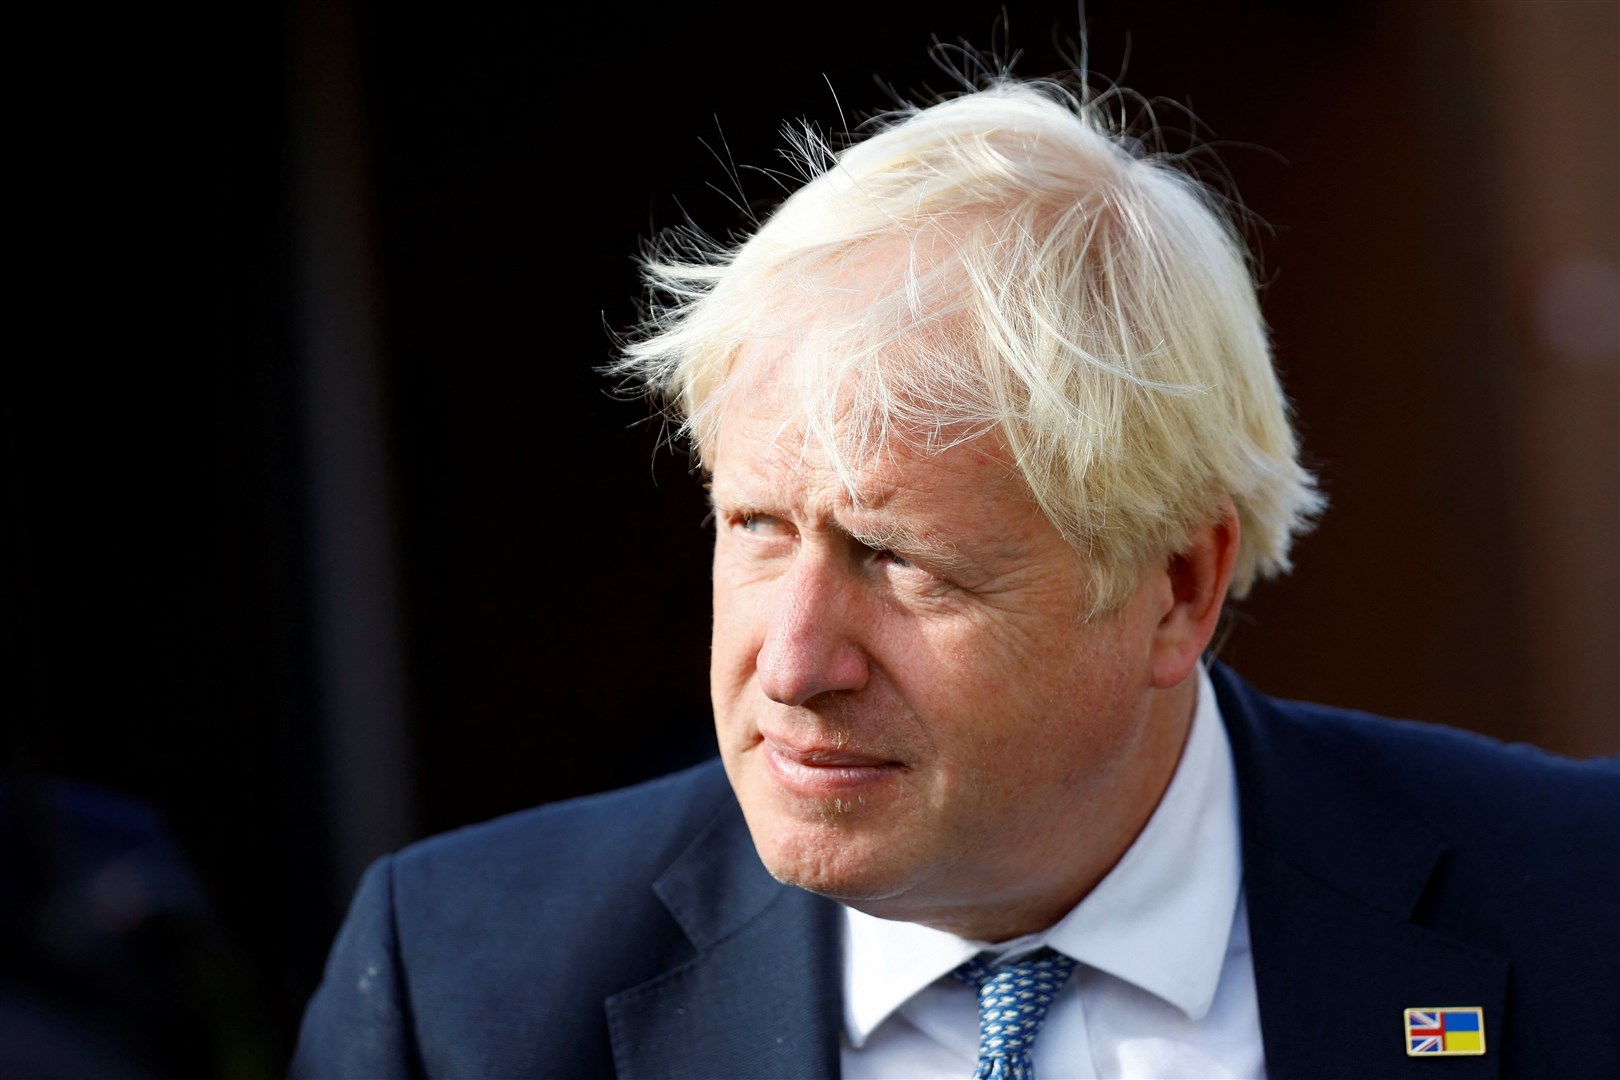 The Cabinet Office has confirmed it intends to ‘share a schedule’ for when it will submit WhatsApp messages from Boris Johnson to the inquiry (Andrew Boyers/PA)